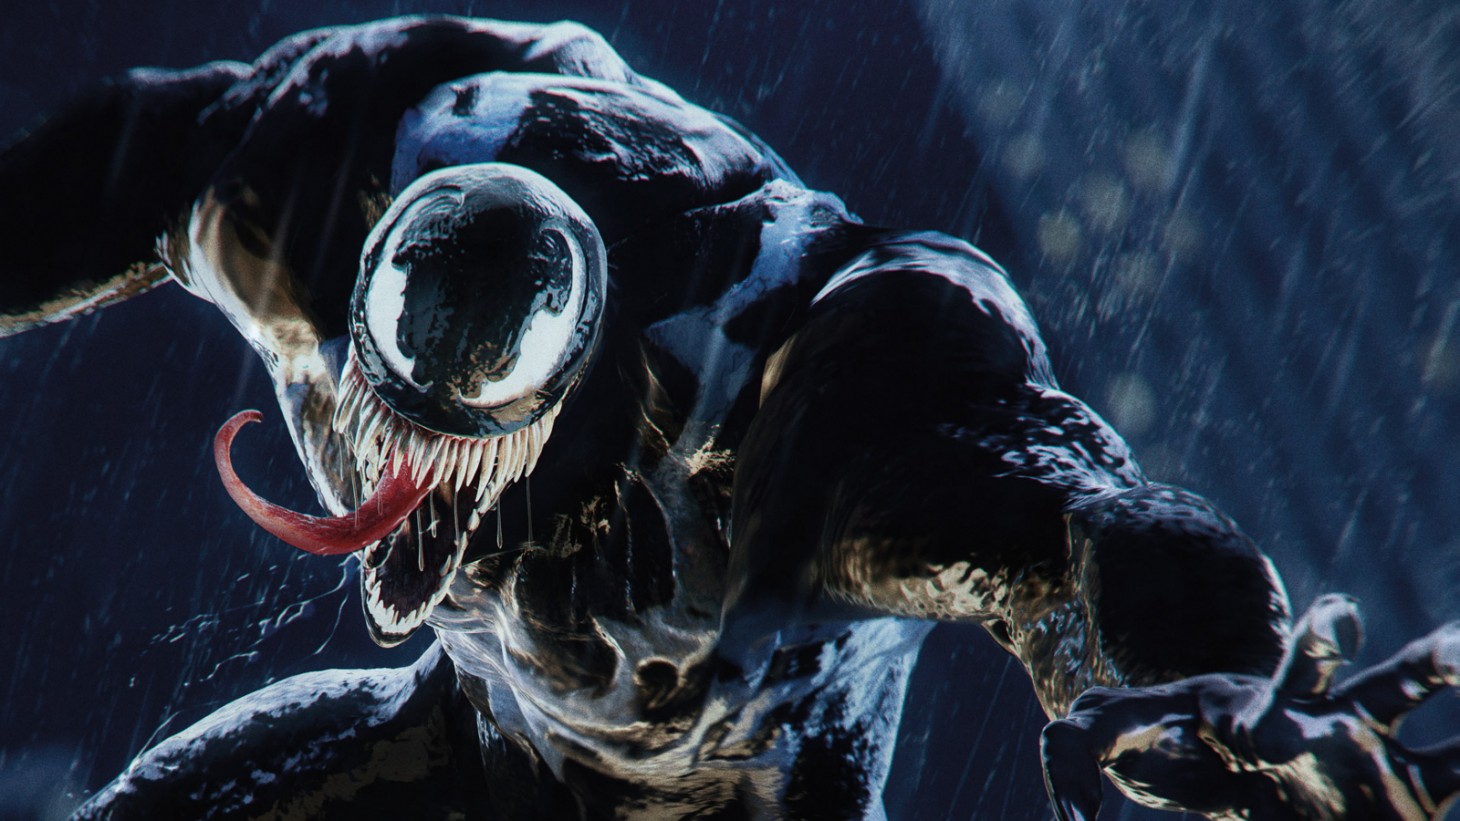 Awesome Story Trailer For Marvel's SPIDER-MAN 2 Features Venom in